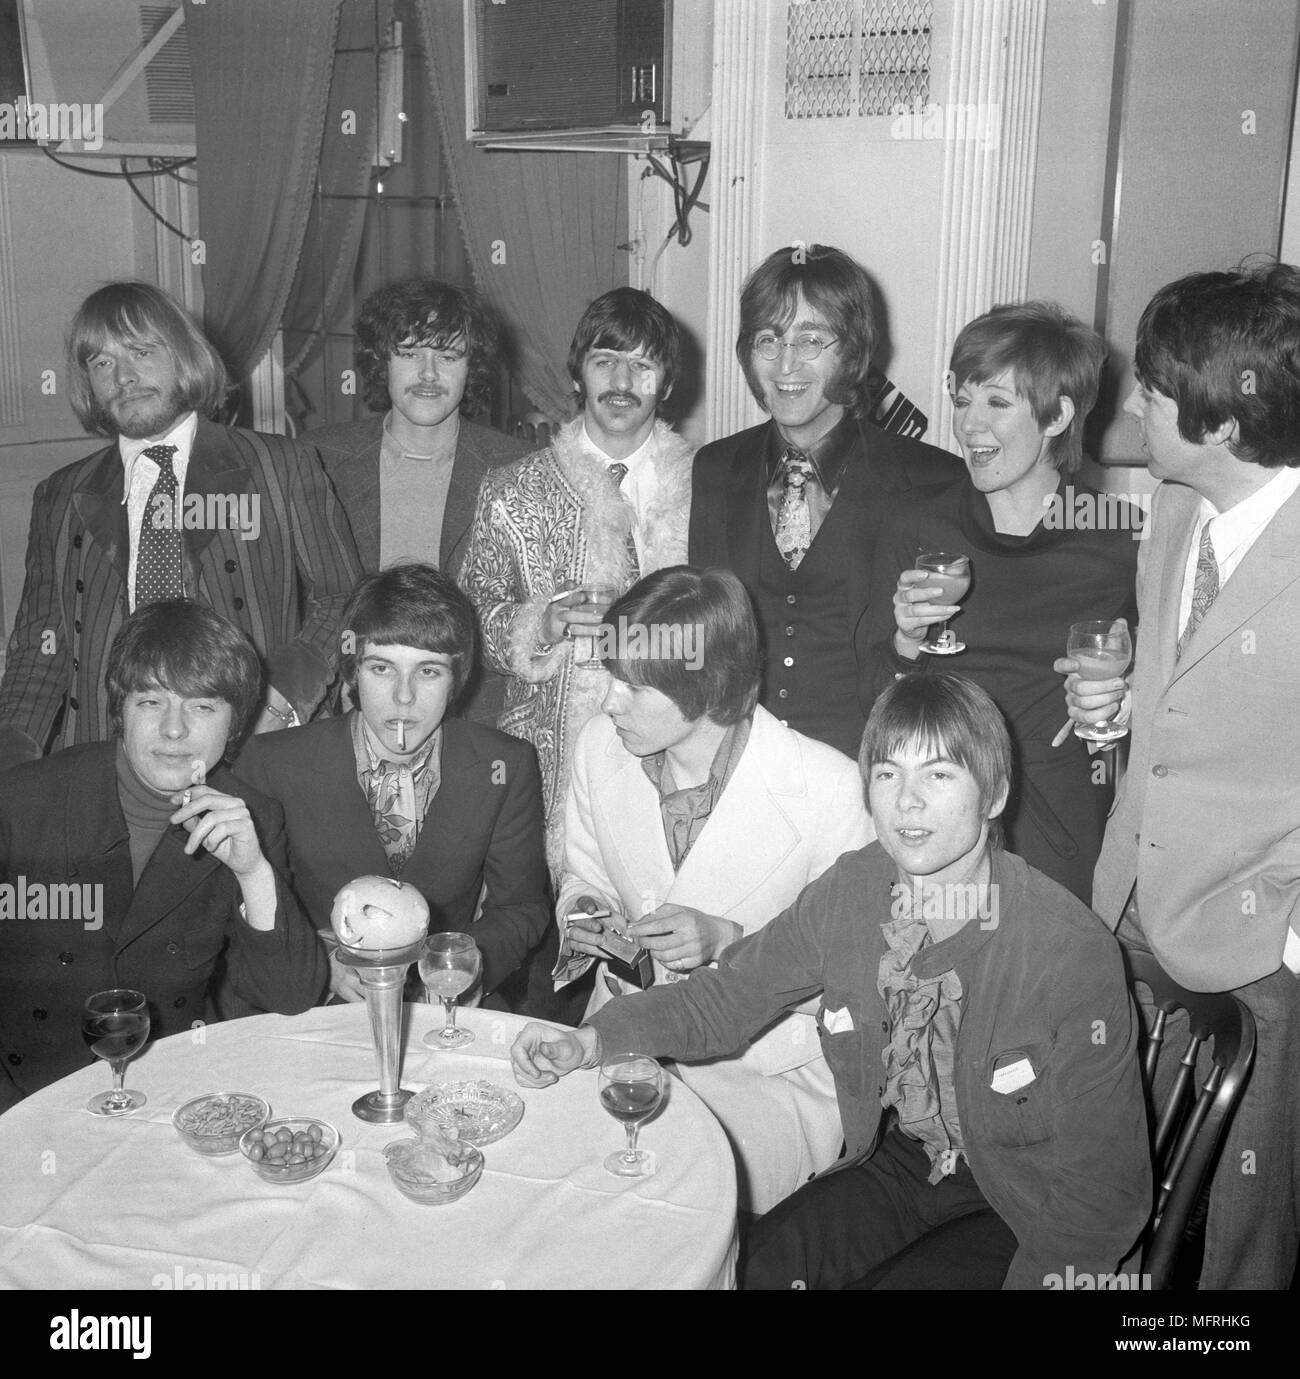 Guitarist Brian Jones (back, left), of The Rolling Stones, pictured with the Beatles and 'Grapefruit' group, which is celebrating the release of their first RCA single 'Dear Delilah'.  at at the 'Grapefruit' party in the Mayfair Suit of the Hanover Grand Hotel in London. Stock Photo